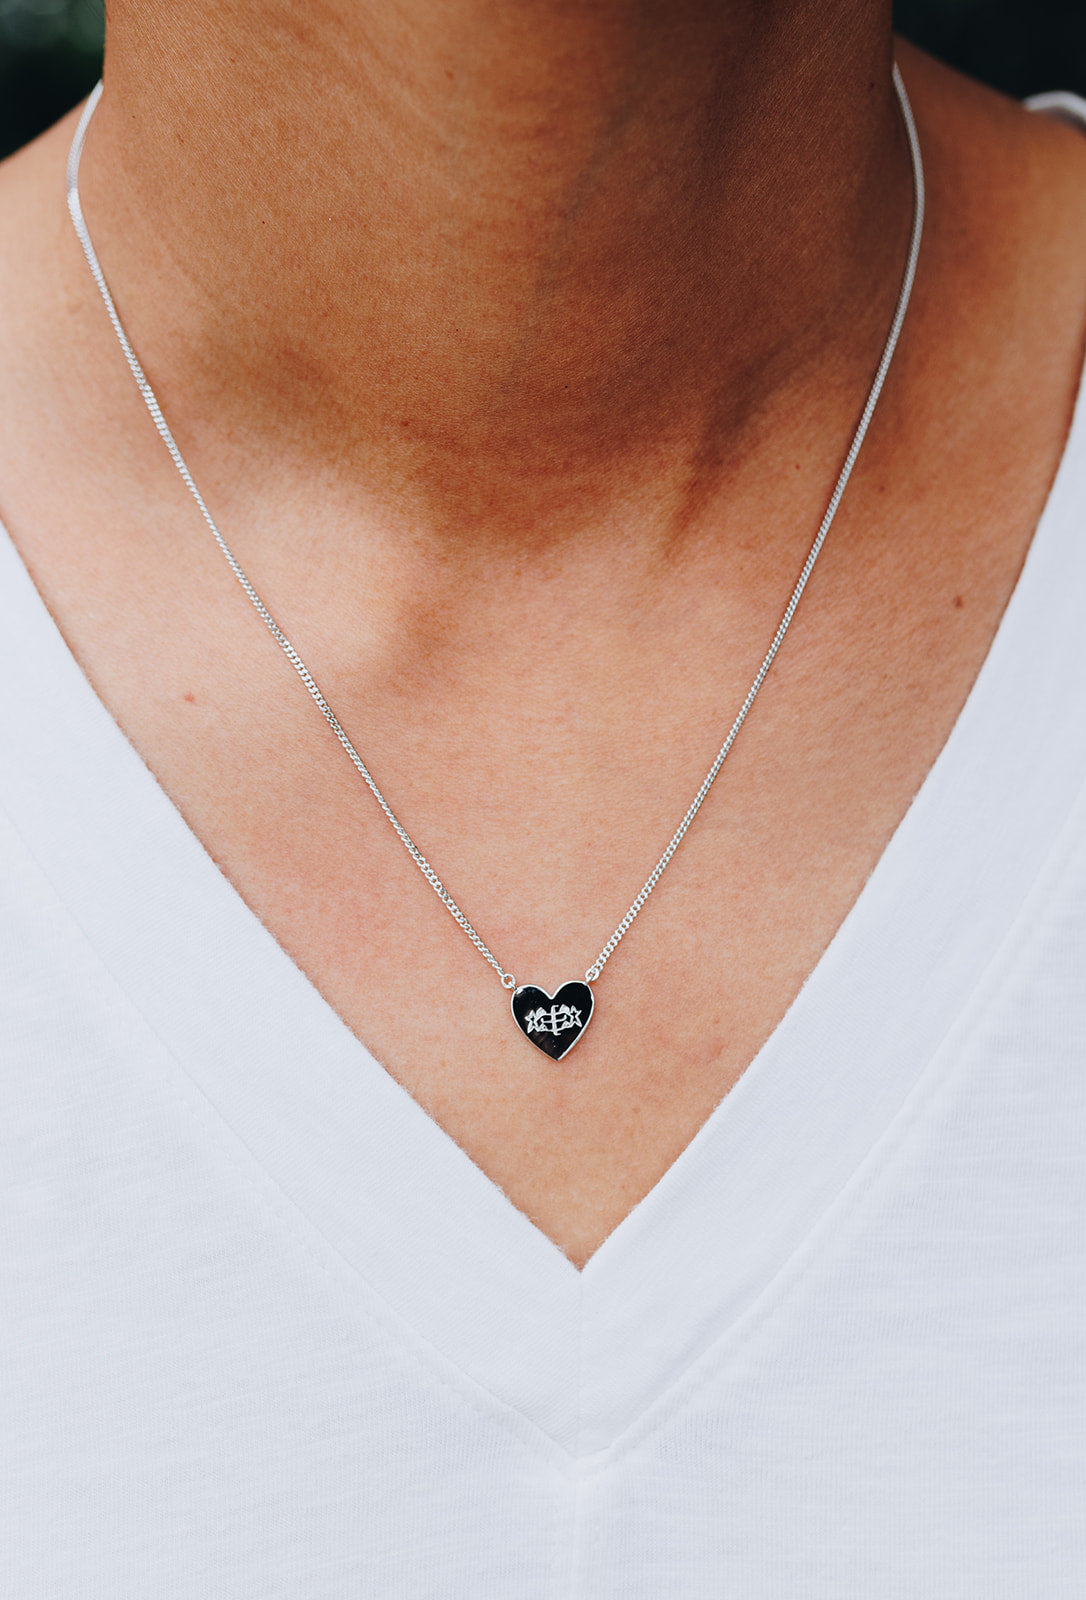 silver heart Bahai necklace with ringstone symbol